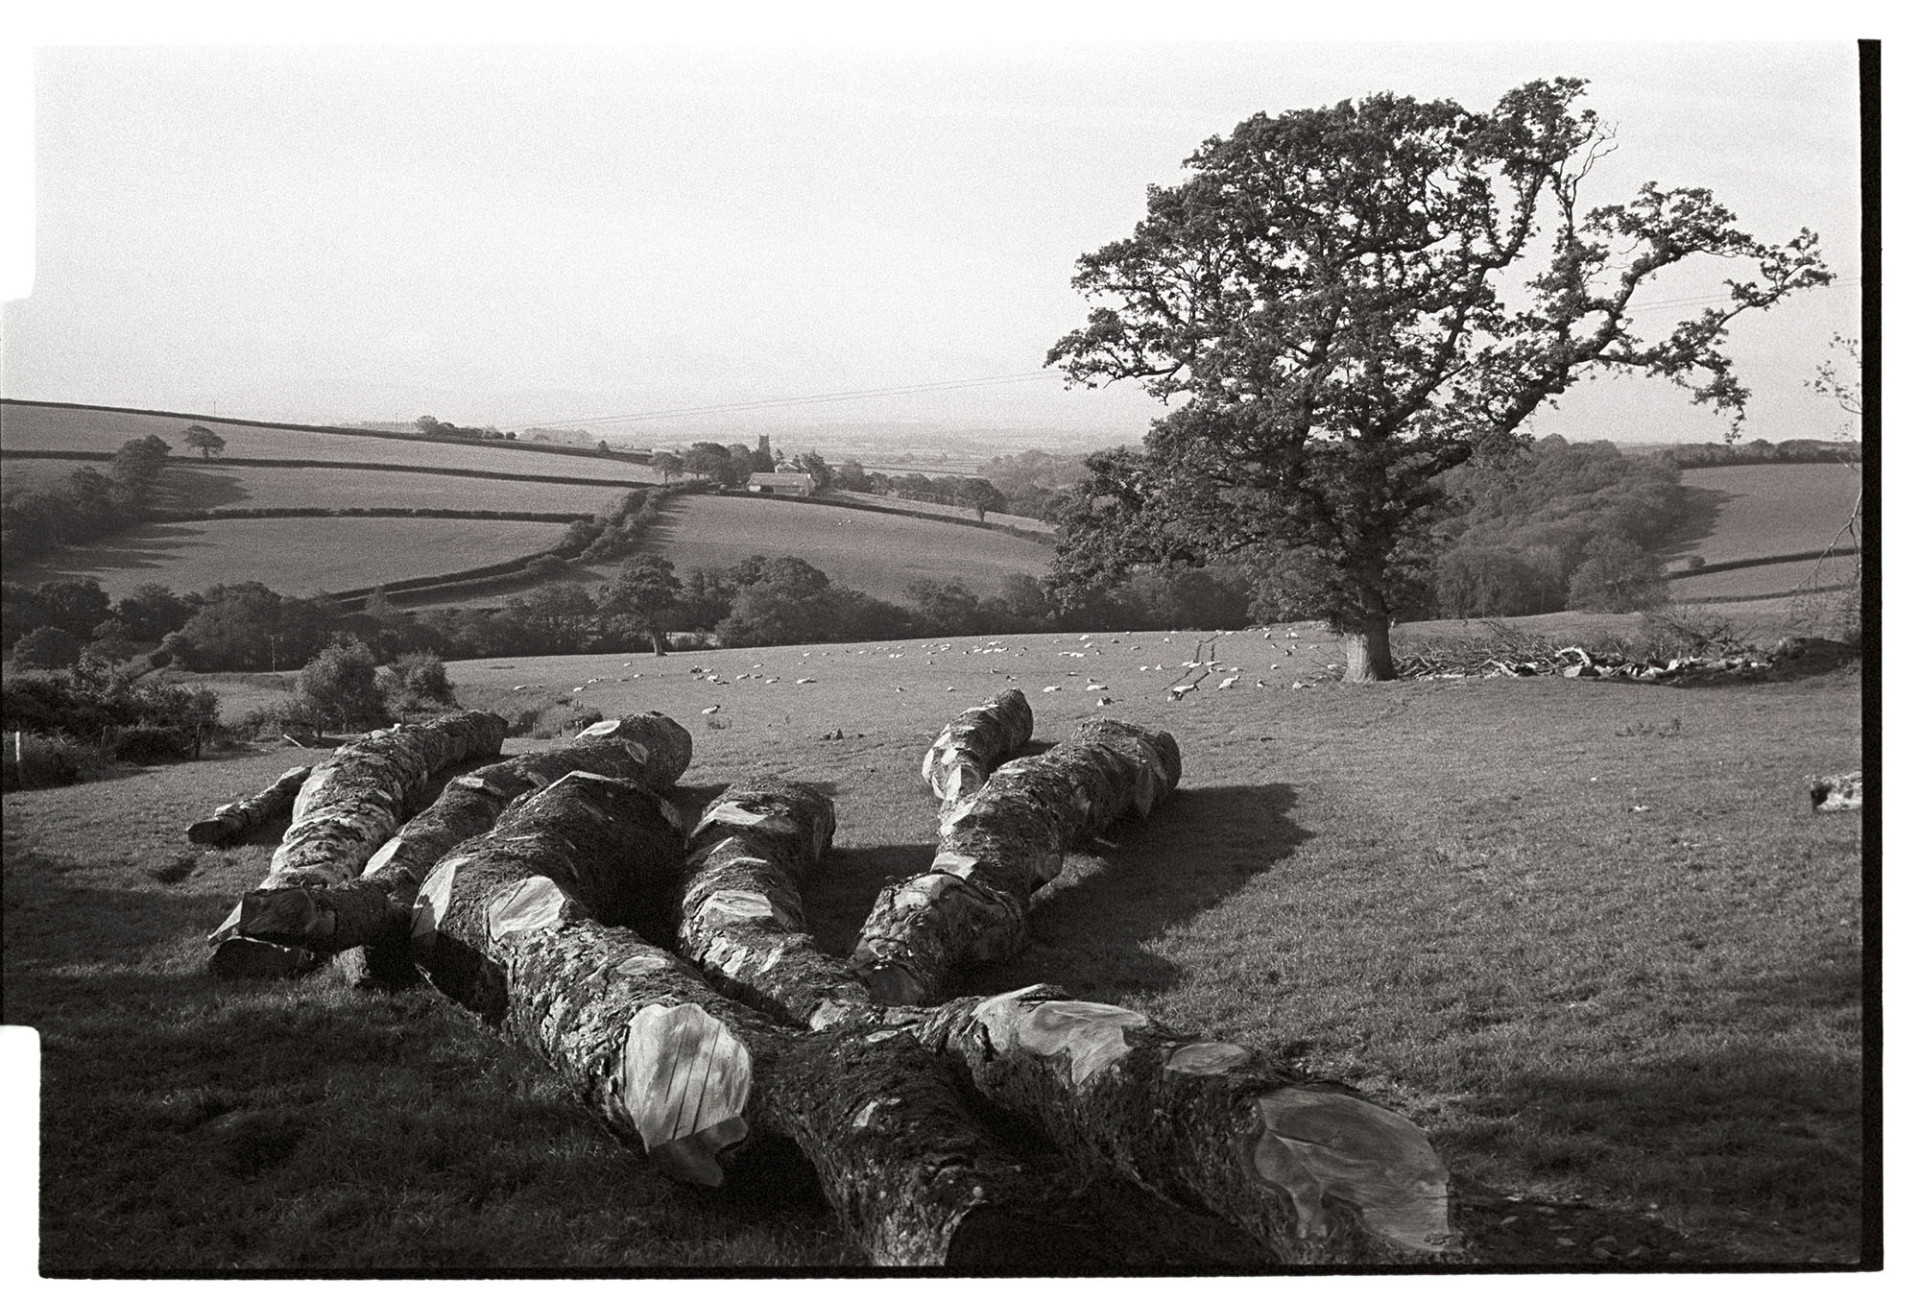 Felled elm trunks in landscape. 
[Felled elm tree trunks lying in a field with trees and sheep at Berry, Iddesleigh. Farmland and fields are in the background.]